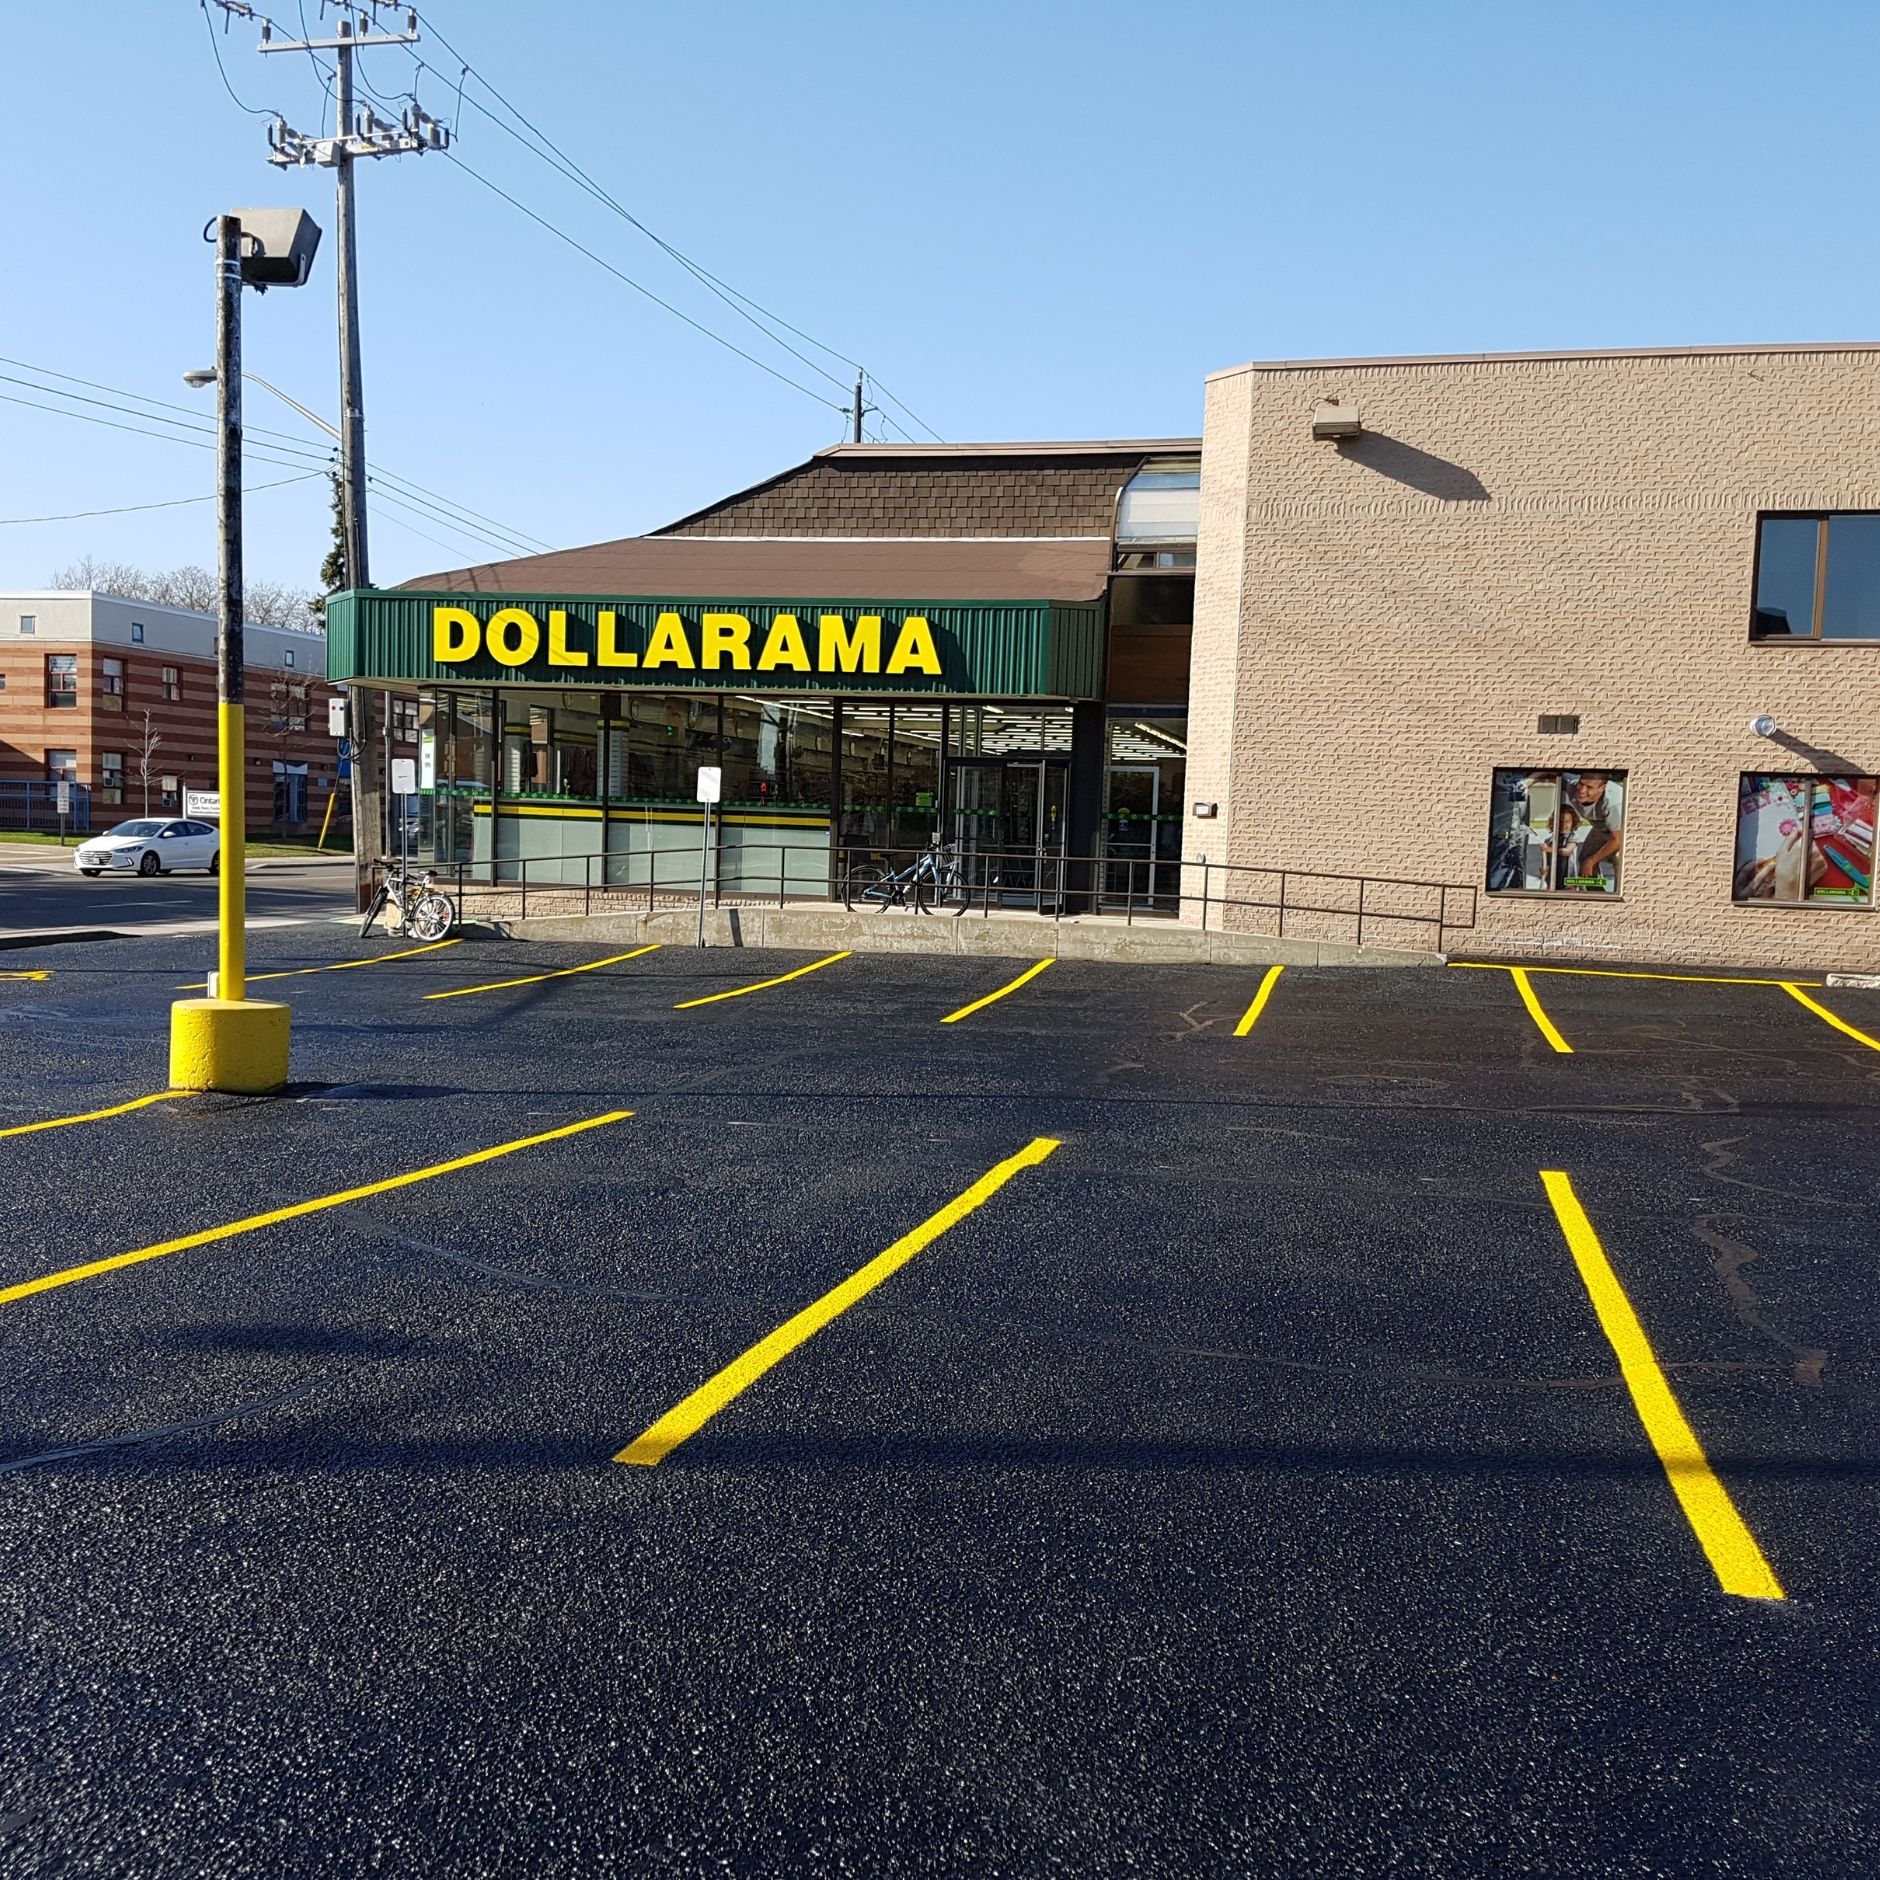 Commercial Paver Restoration in the GTA